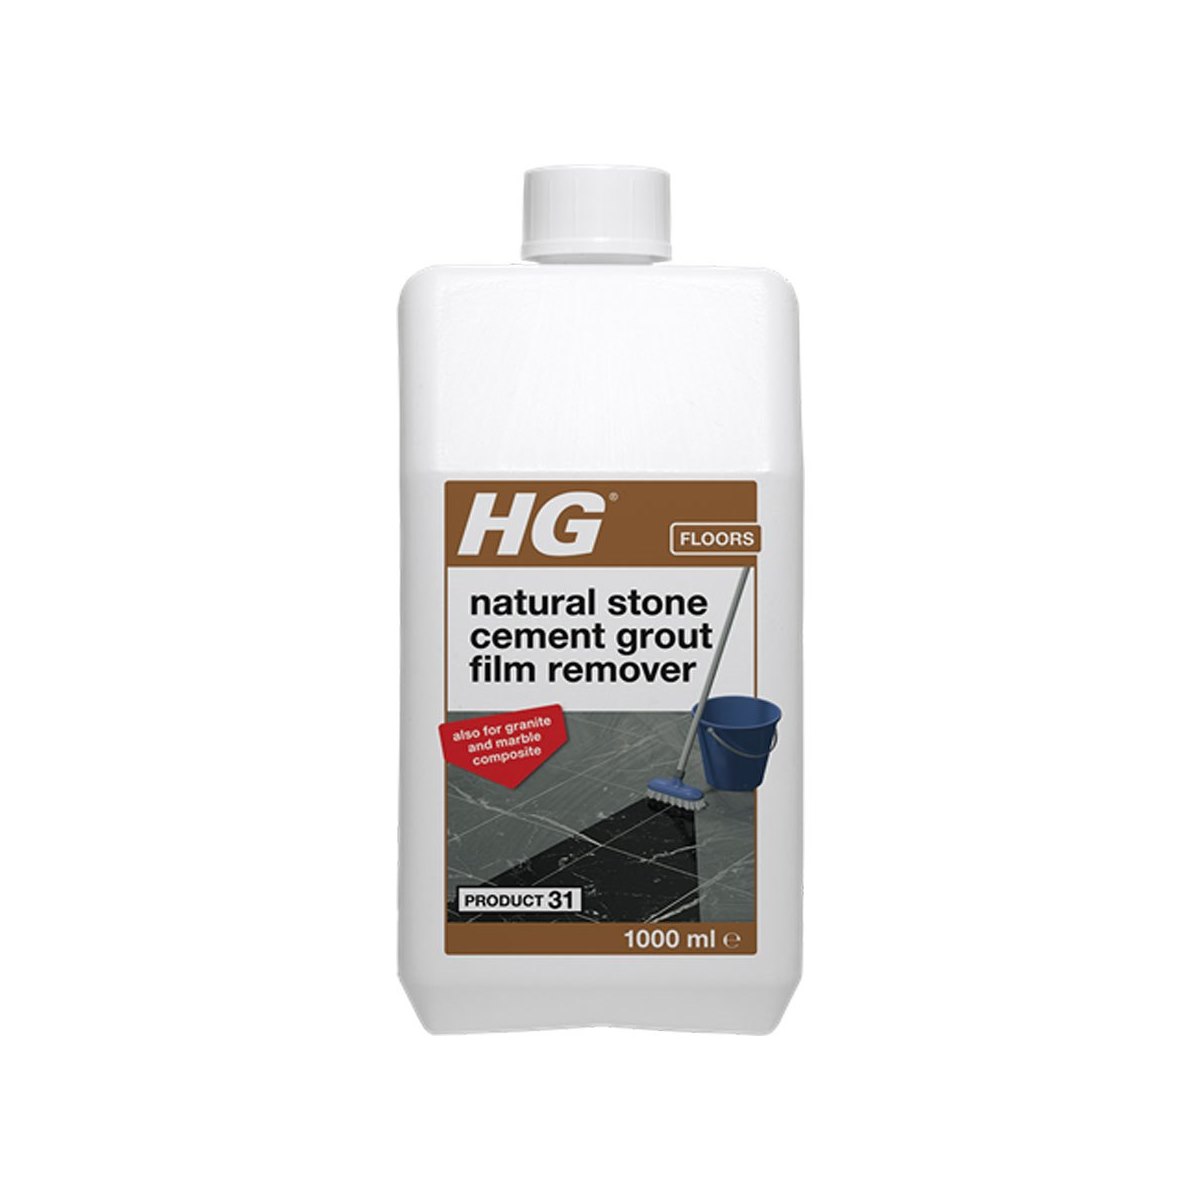 HG Natural Stone Cement Grout Film Remover 1 Litre Product 31